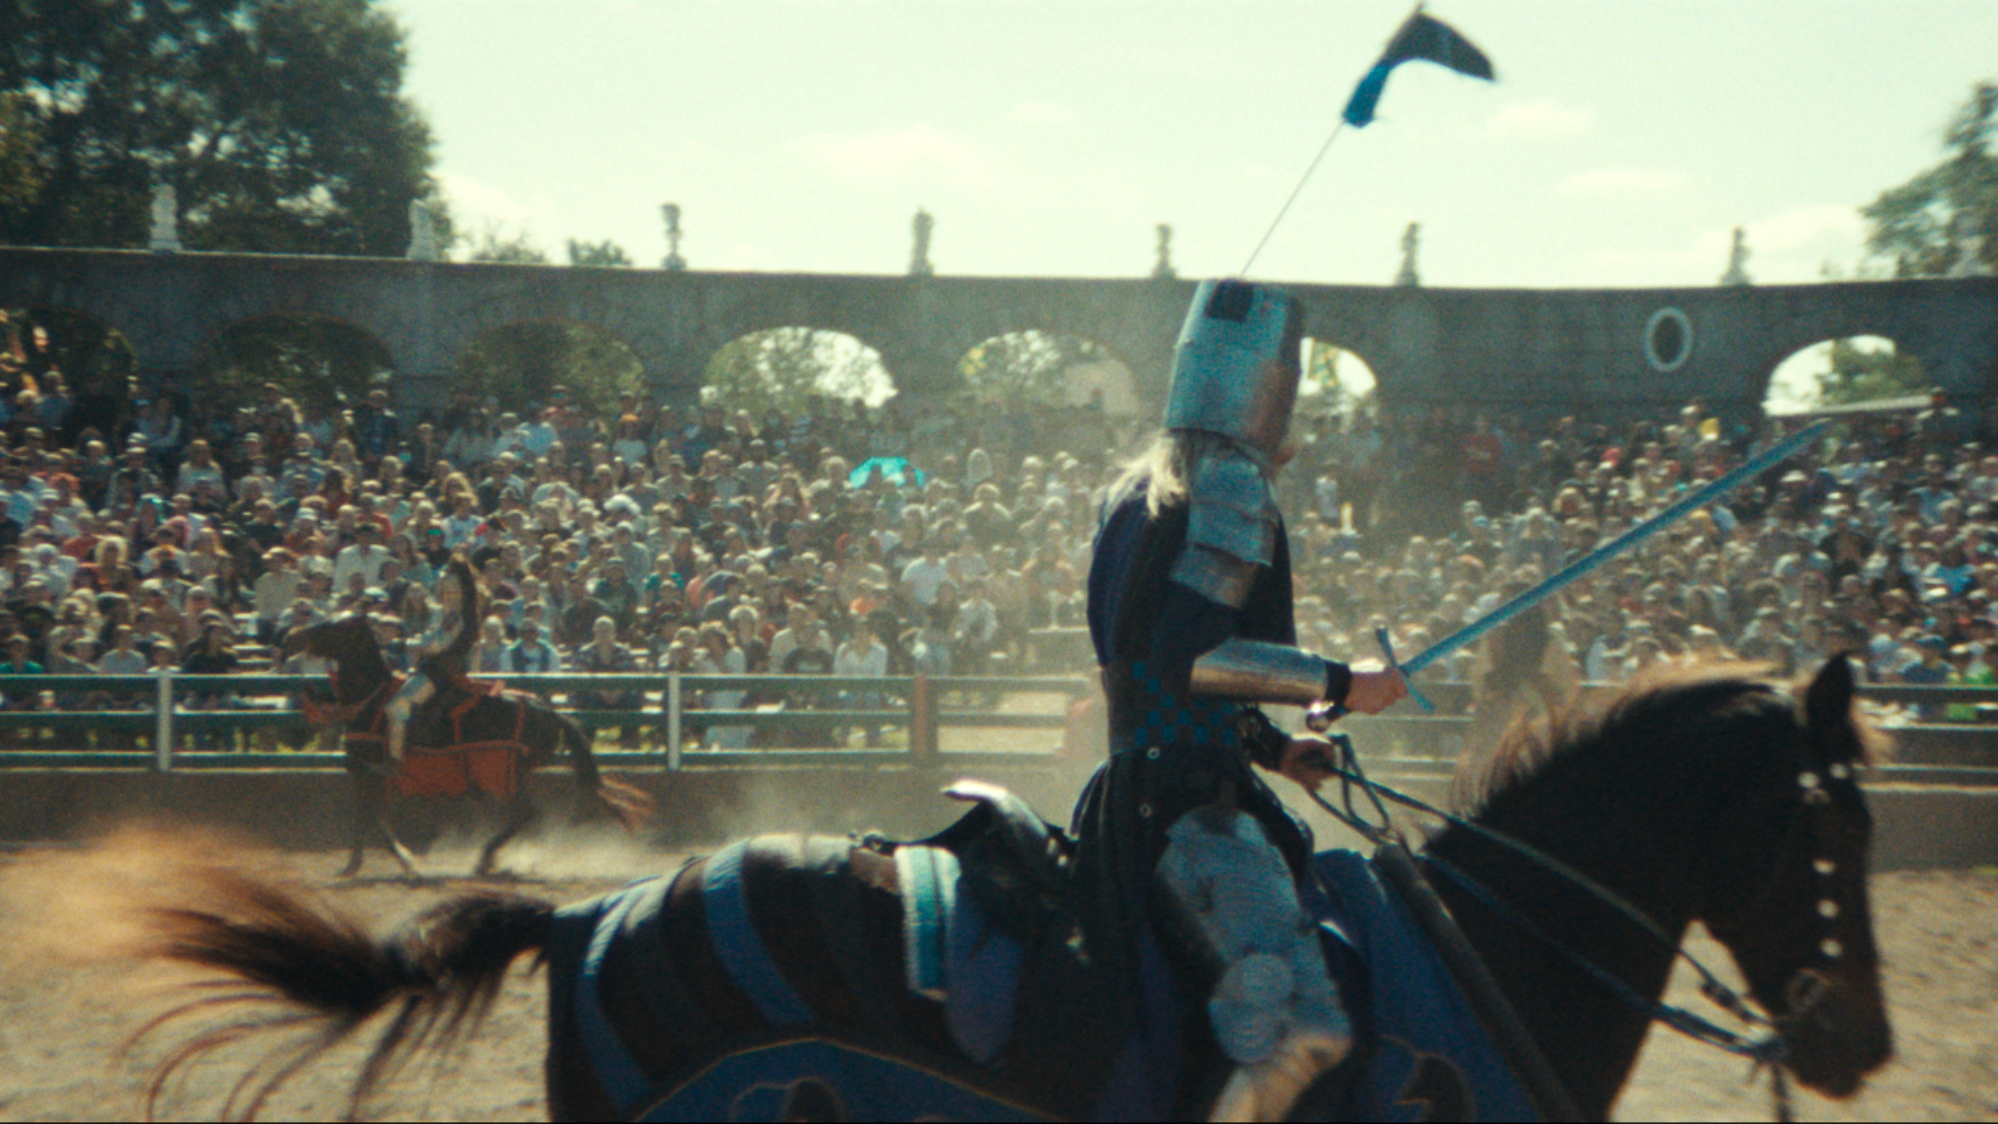 Texas Ren Fest's real life power struggle premieres on HBO